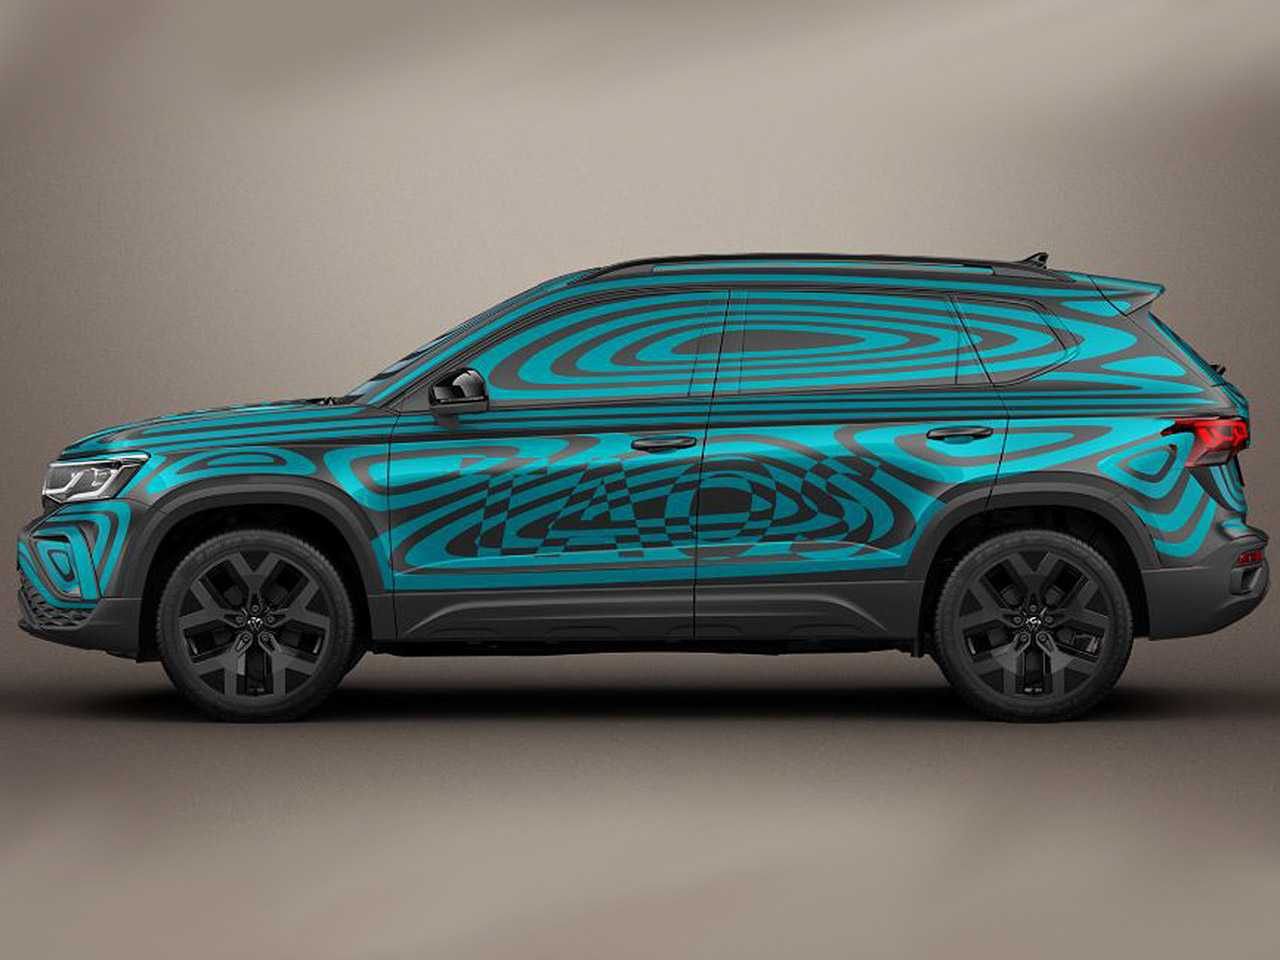 VolkswagenTaos 2021 - lateral